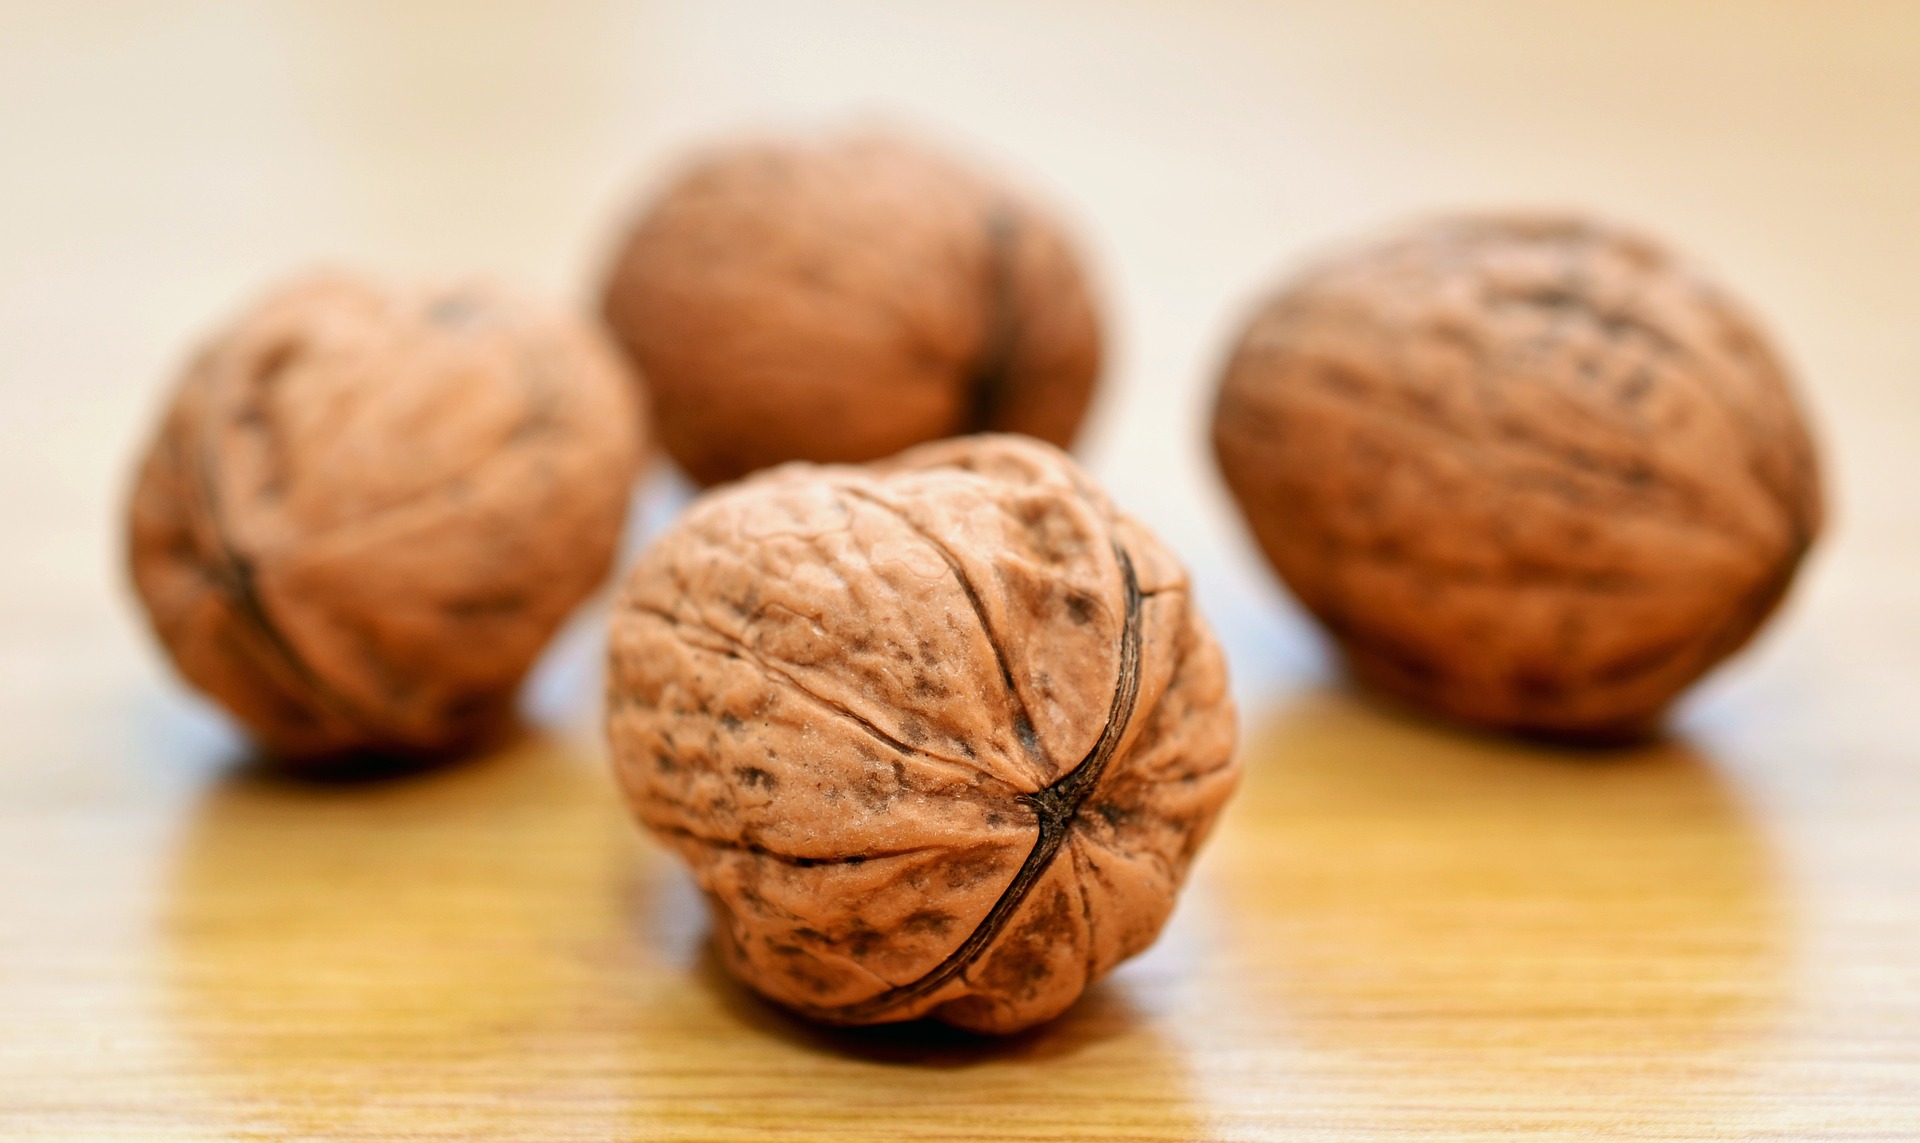 A pile of walnuts nuts; our No Win No Fee allergy compensation solicitors discuss reporting food allergies, and no win no fee food allergy compensation claims.